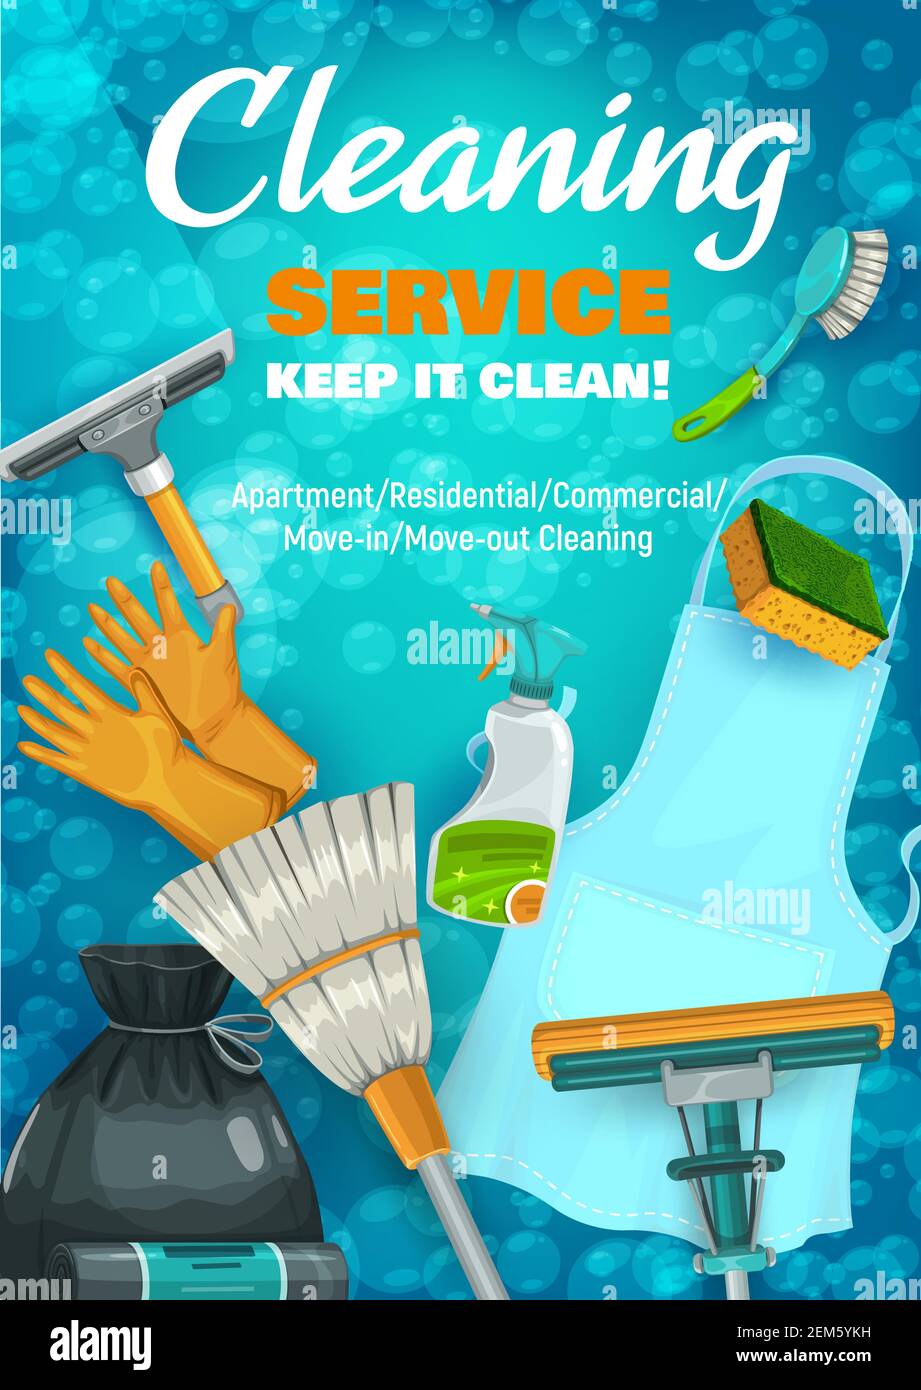 https://c8.alamy.com/comp/2EM5YKH/house-cleaning-service-equipment-tools-and-detergent-vector-design-mop-brush-and-broom-sponge-apron-gloves-and-window-cleaner-bottle-spray-sque-2EM5YKH.jpg